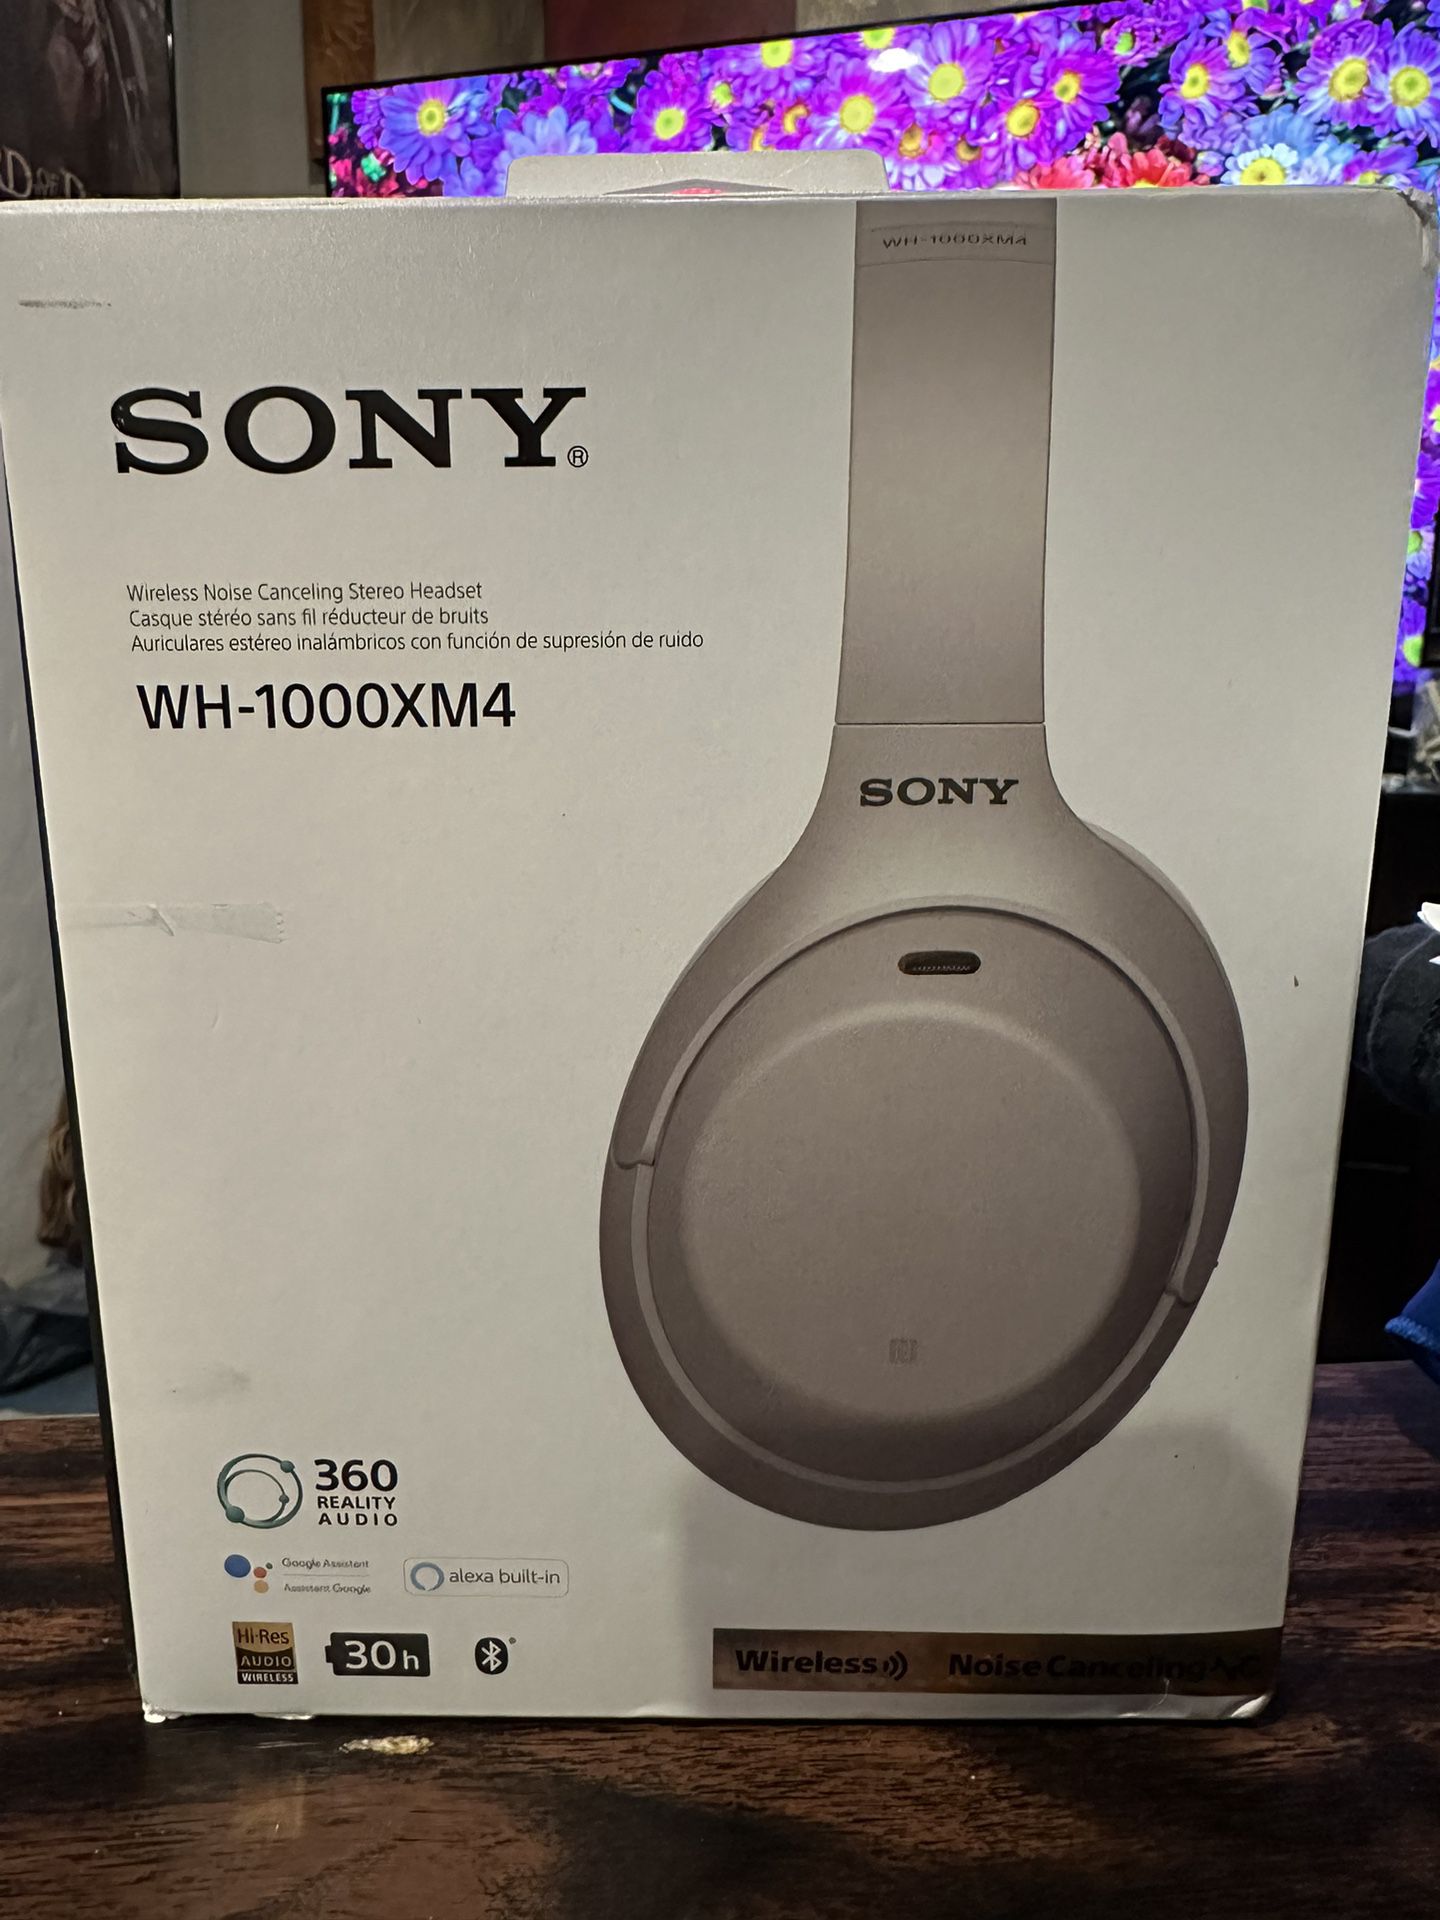 Sony WH-1000XM4 Wireless Noise Cancelling Headset 